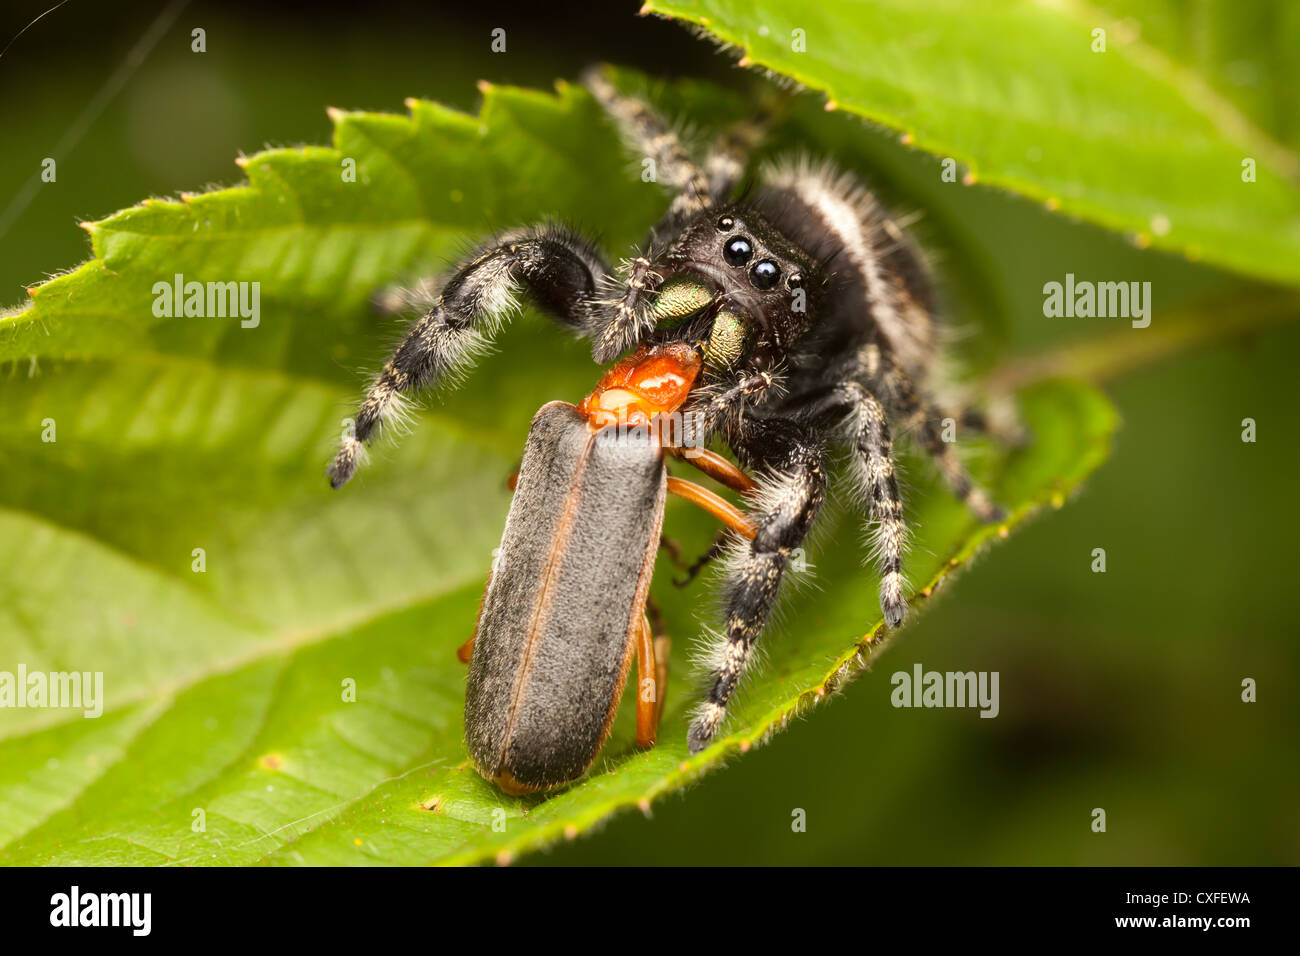 A female Bold Jumper (Phidippus audax) holds on to her captured soldier beetle (Podabrus tomentosus) prey. Stock Photo